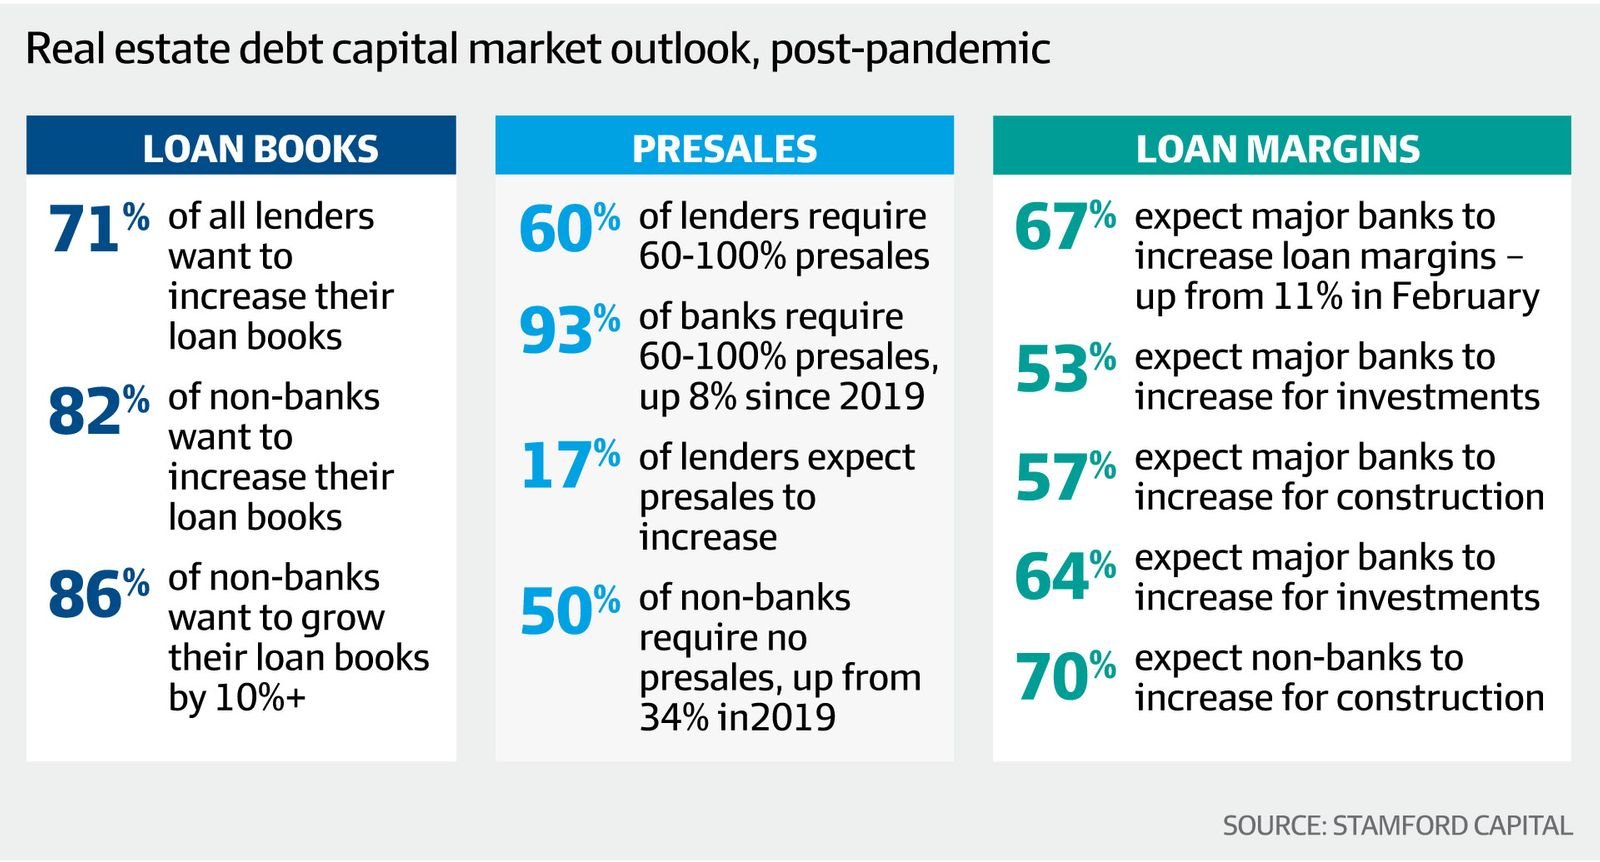 Stamford Capital Data from AFR